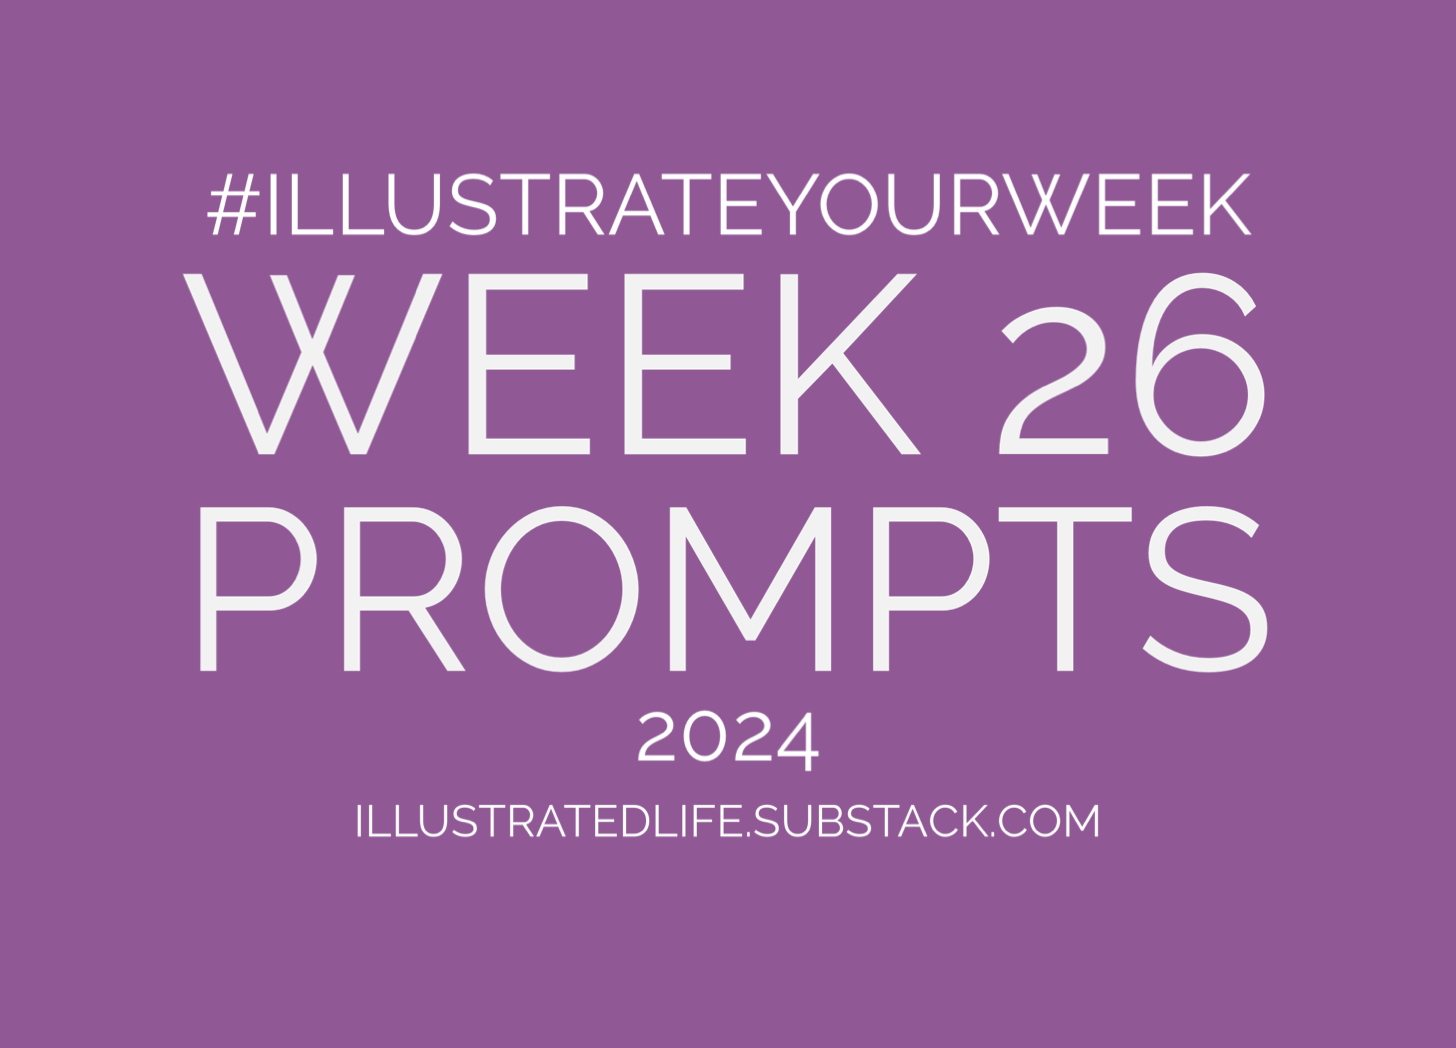 O Week 26 Prompts for Illustrate Your Week 2024